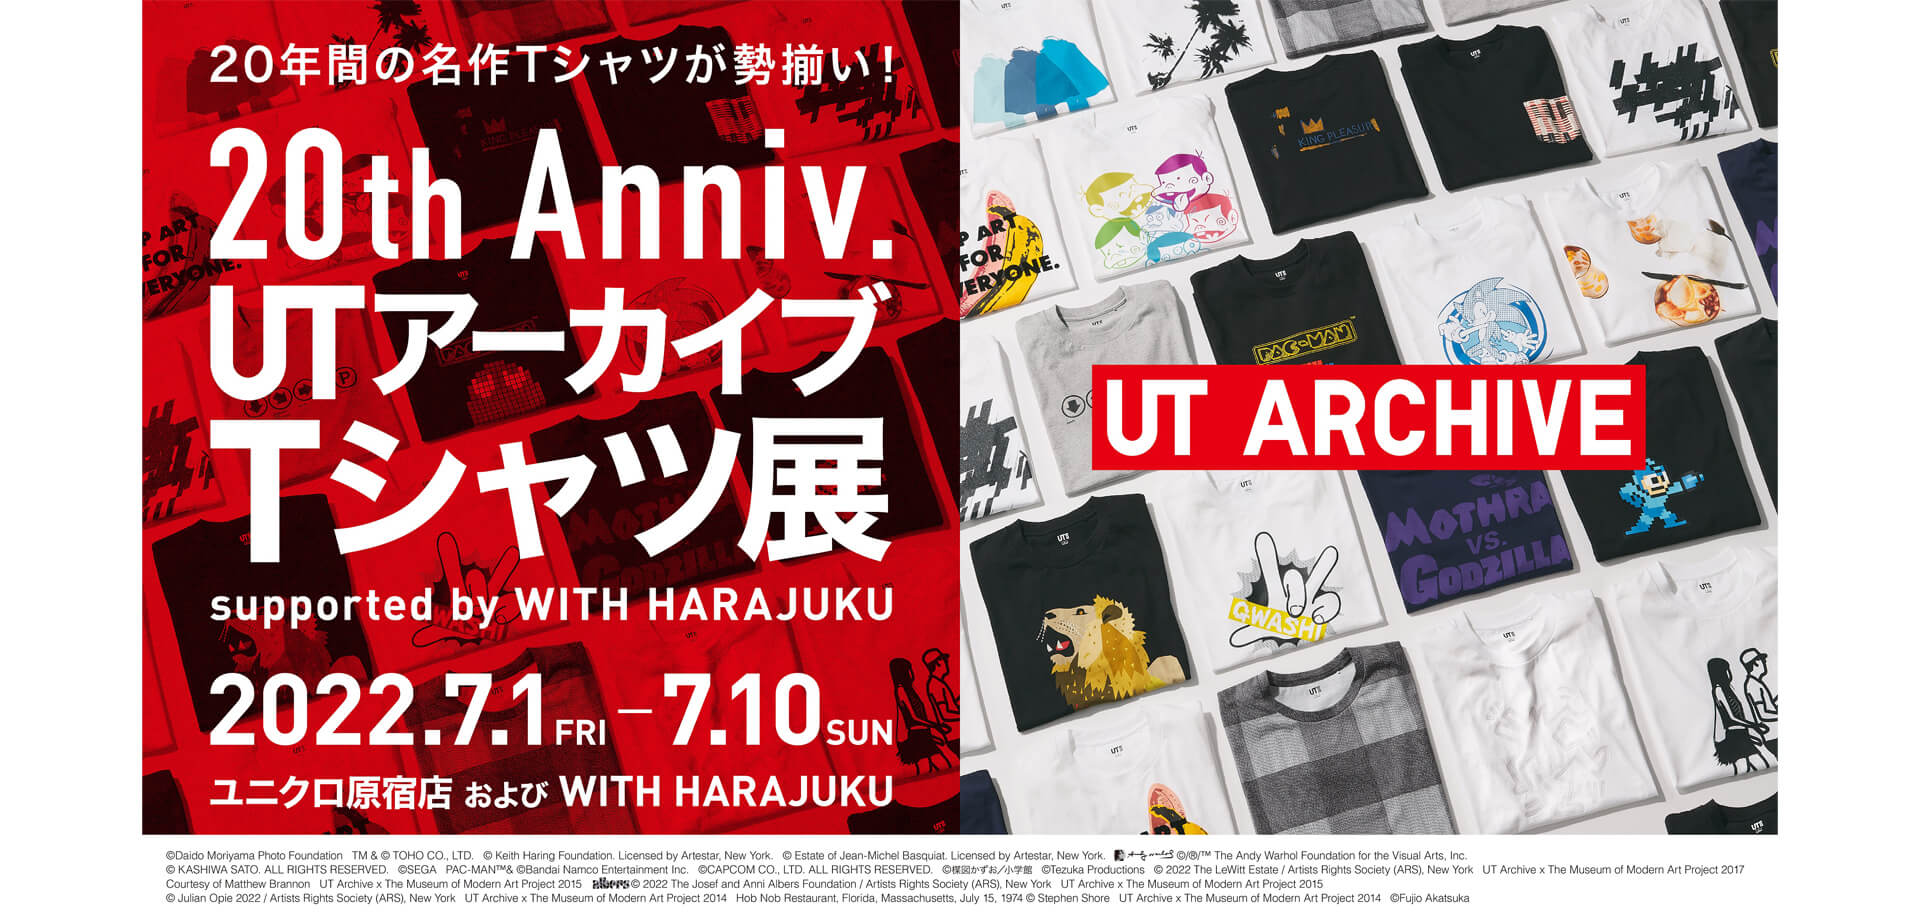 20th UT アーカイブ T シャツ展 supported by WITH HARAJUKU